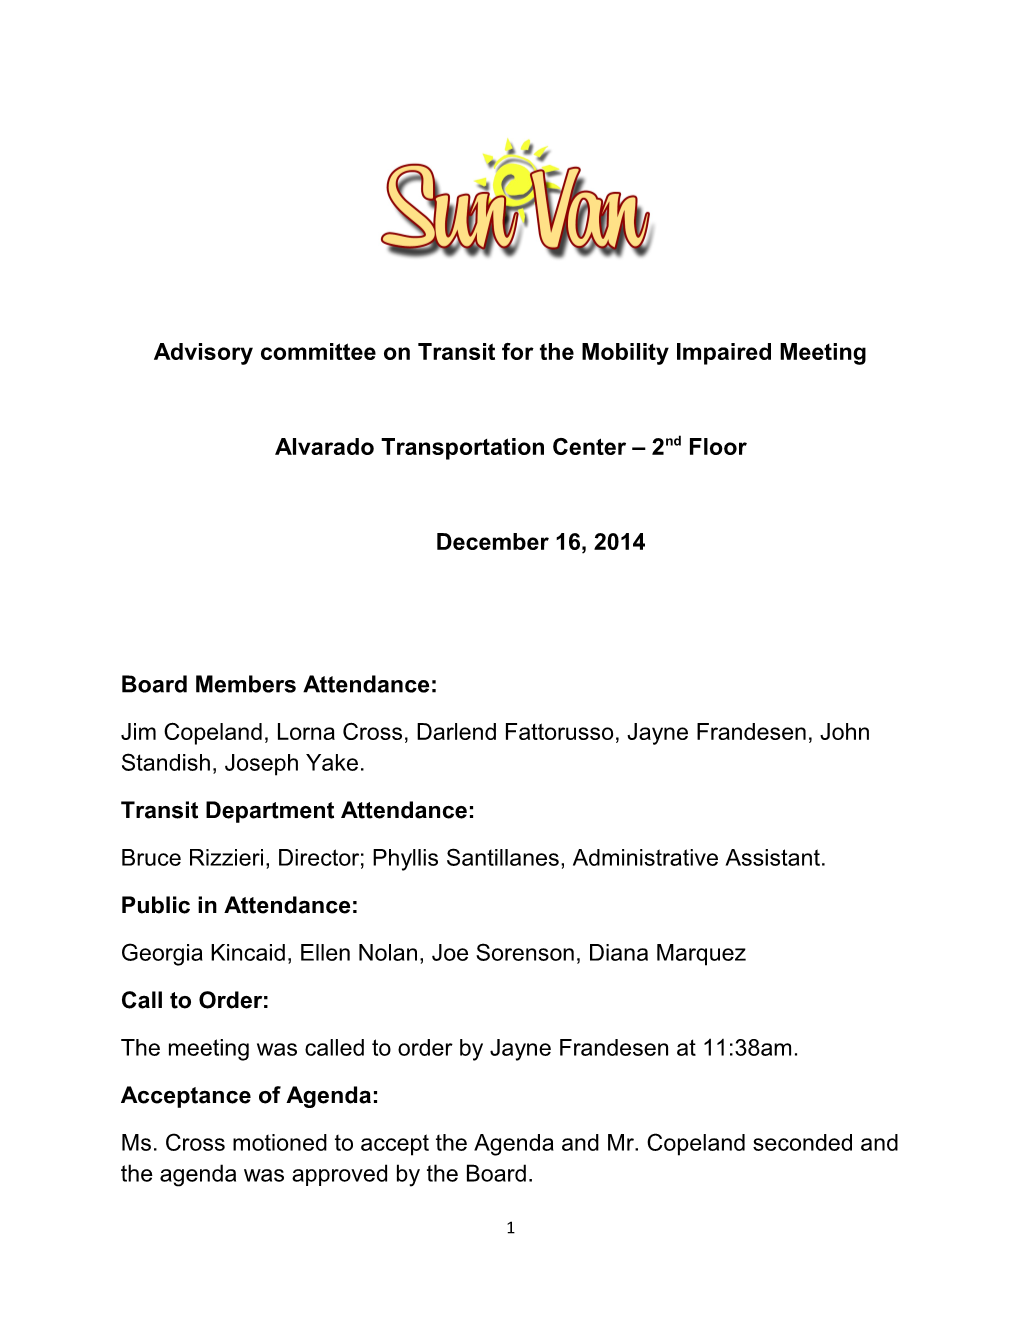 Advisory Committee on Transit for the Mobility Impaired Meeting